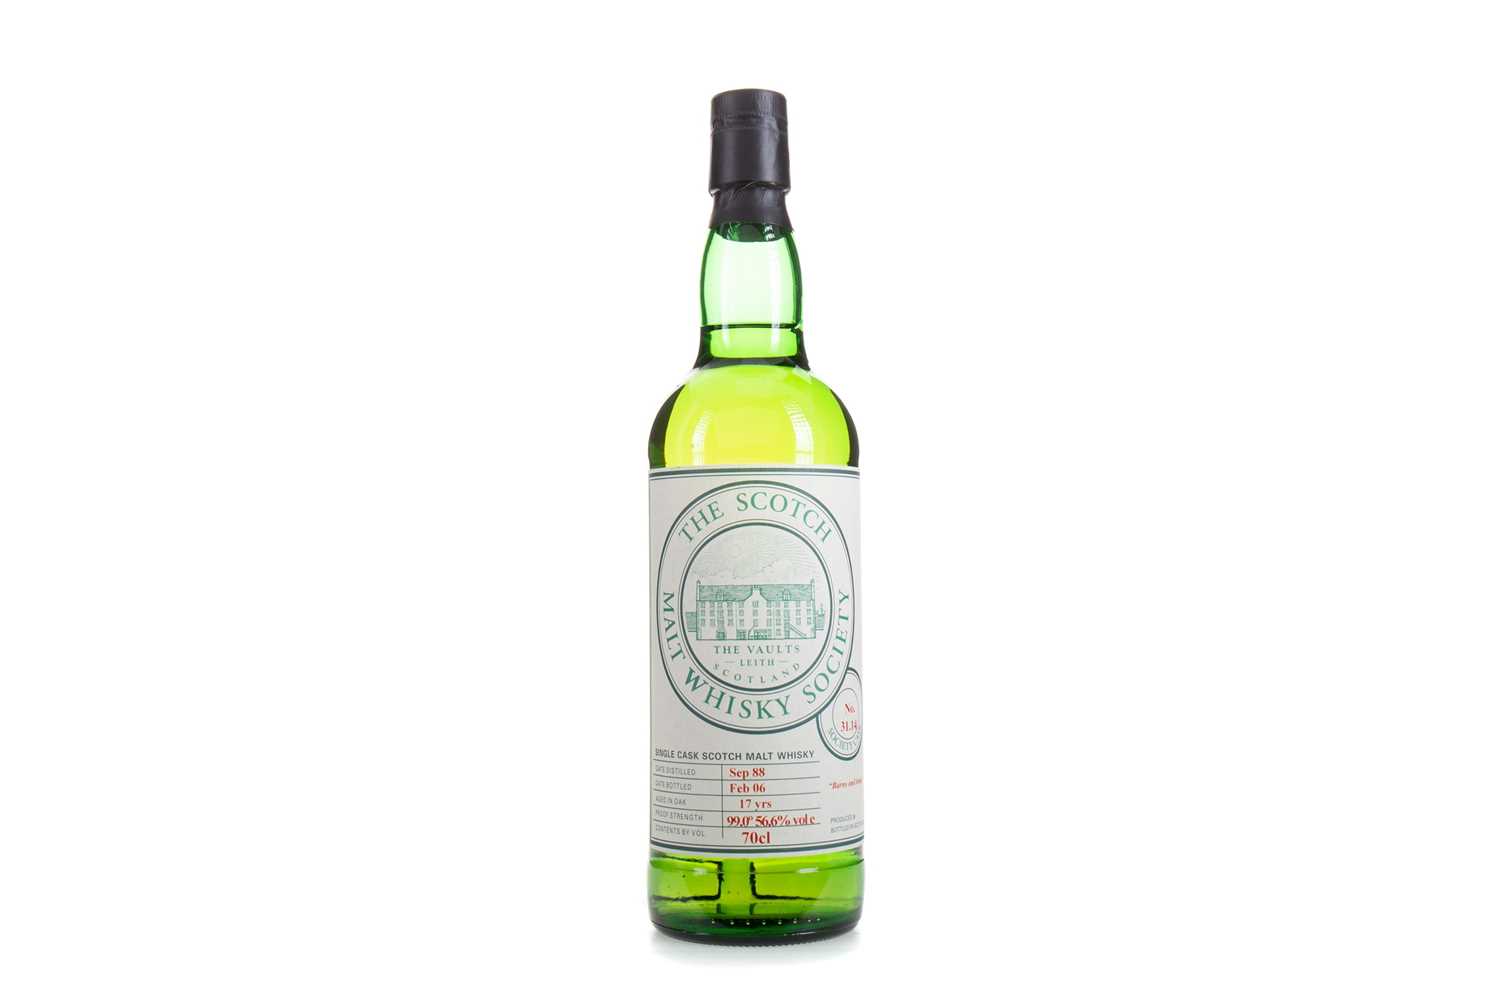 Lot 517 - SMWS 31.14 JURA 1988 17 YEAR OLD